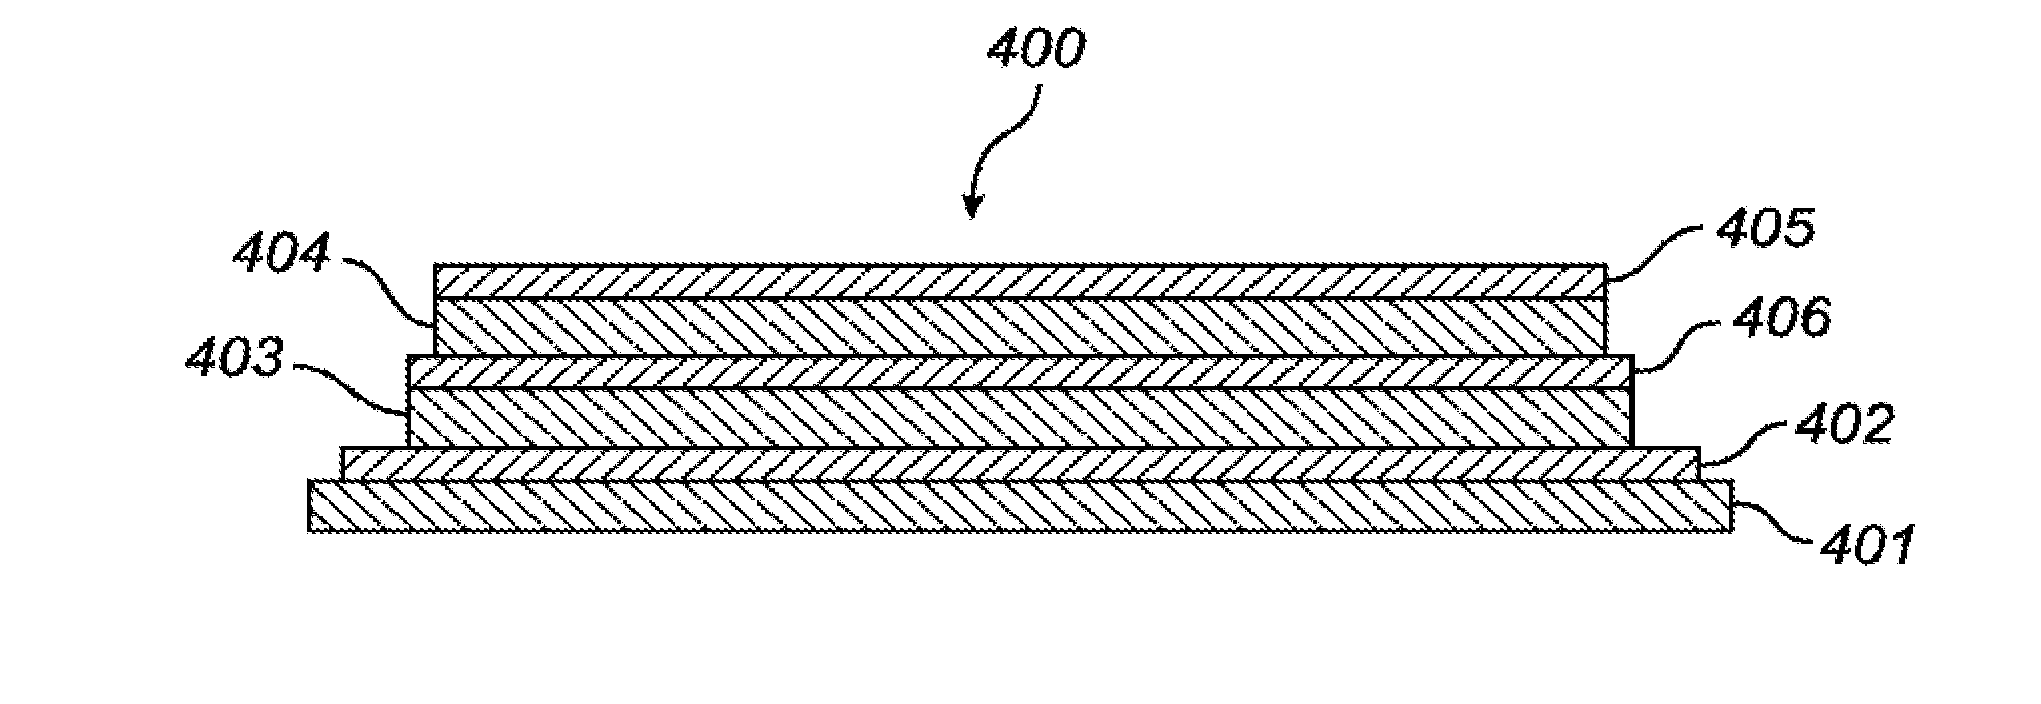 Organic light emitting device with increased light out coupling